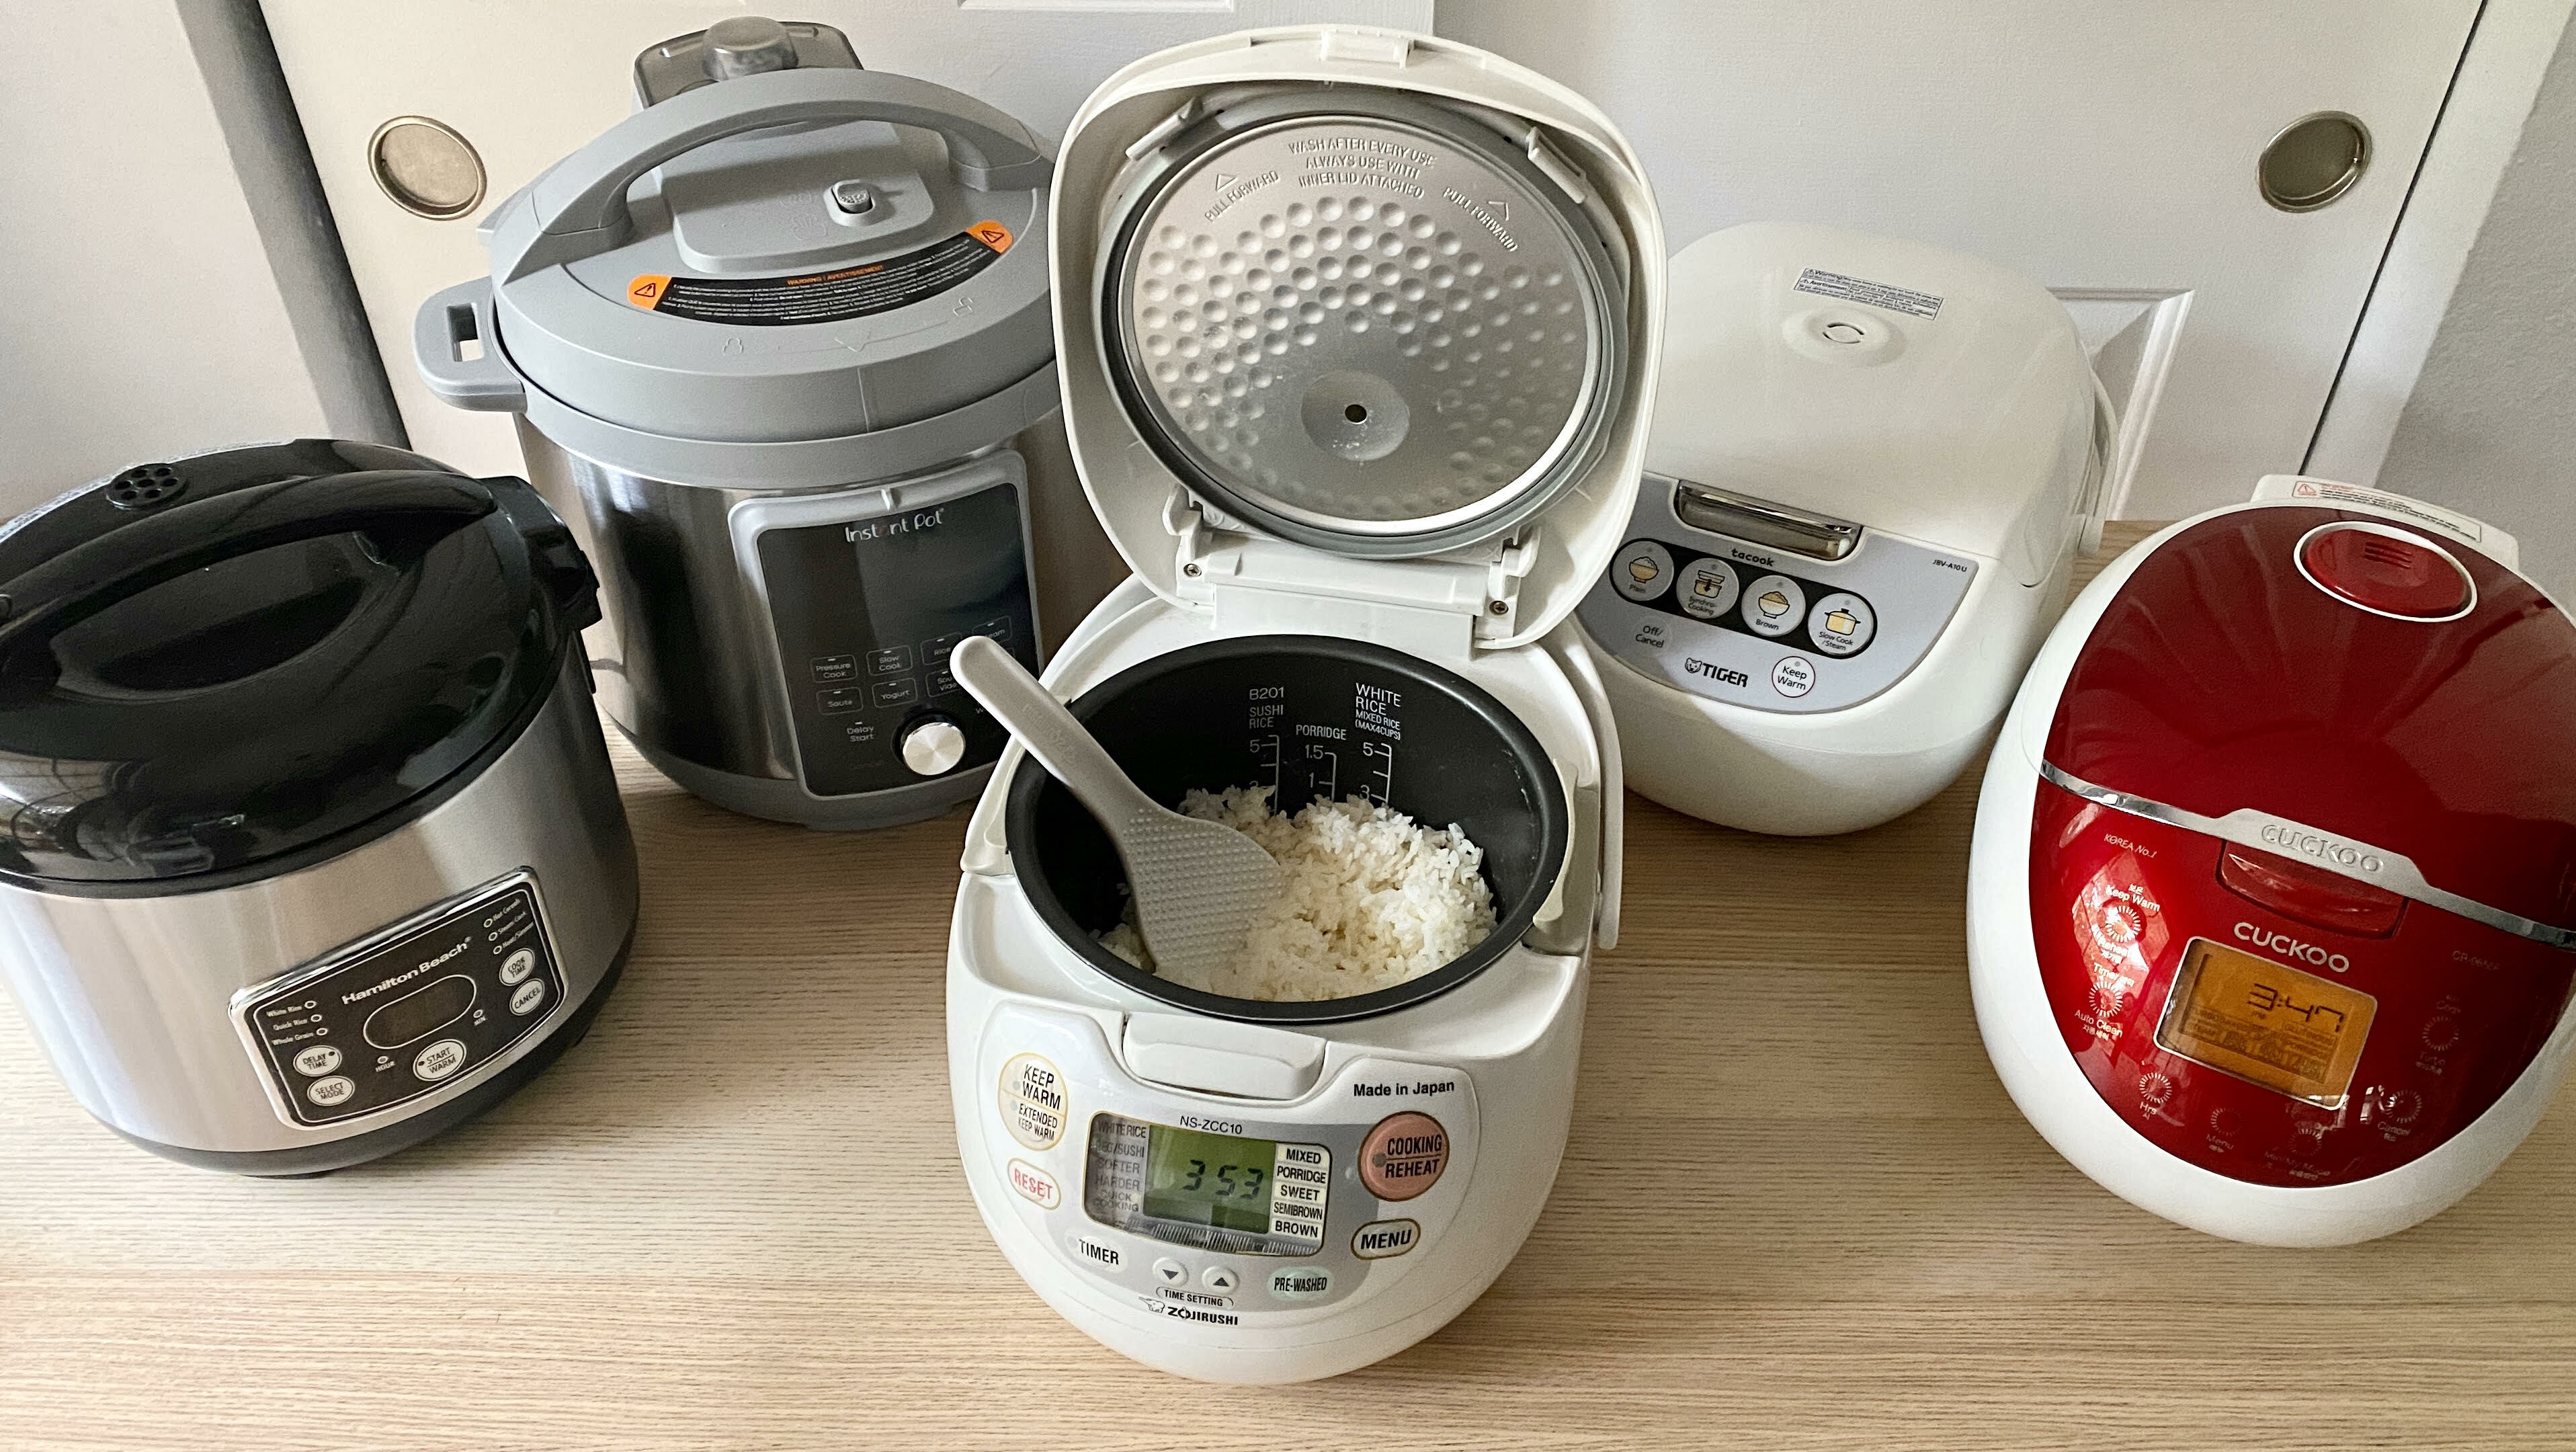 Five rice cookers on a table